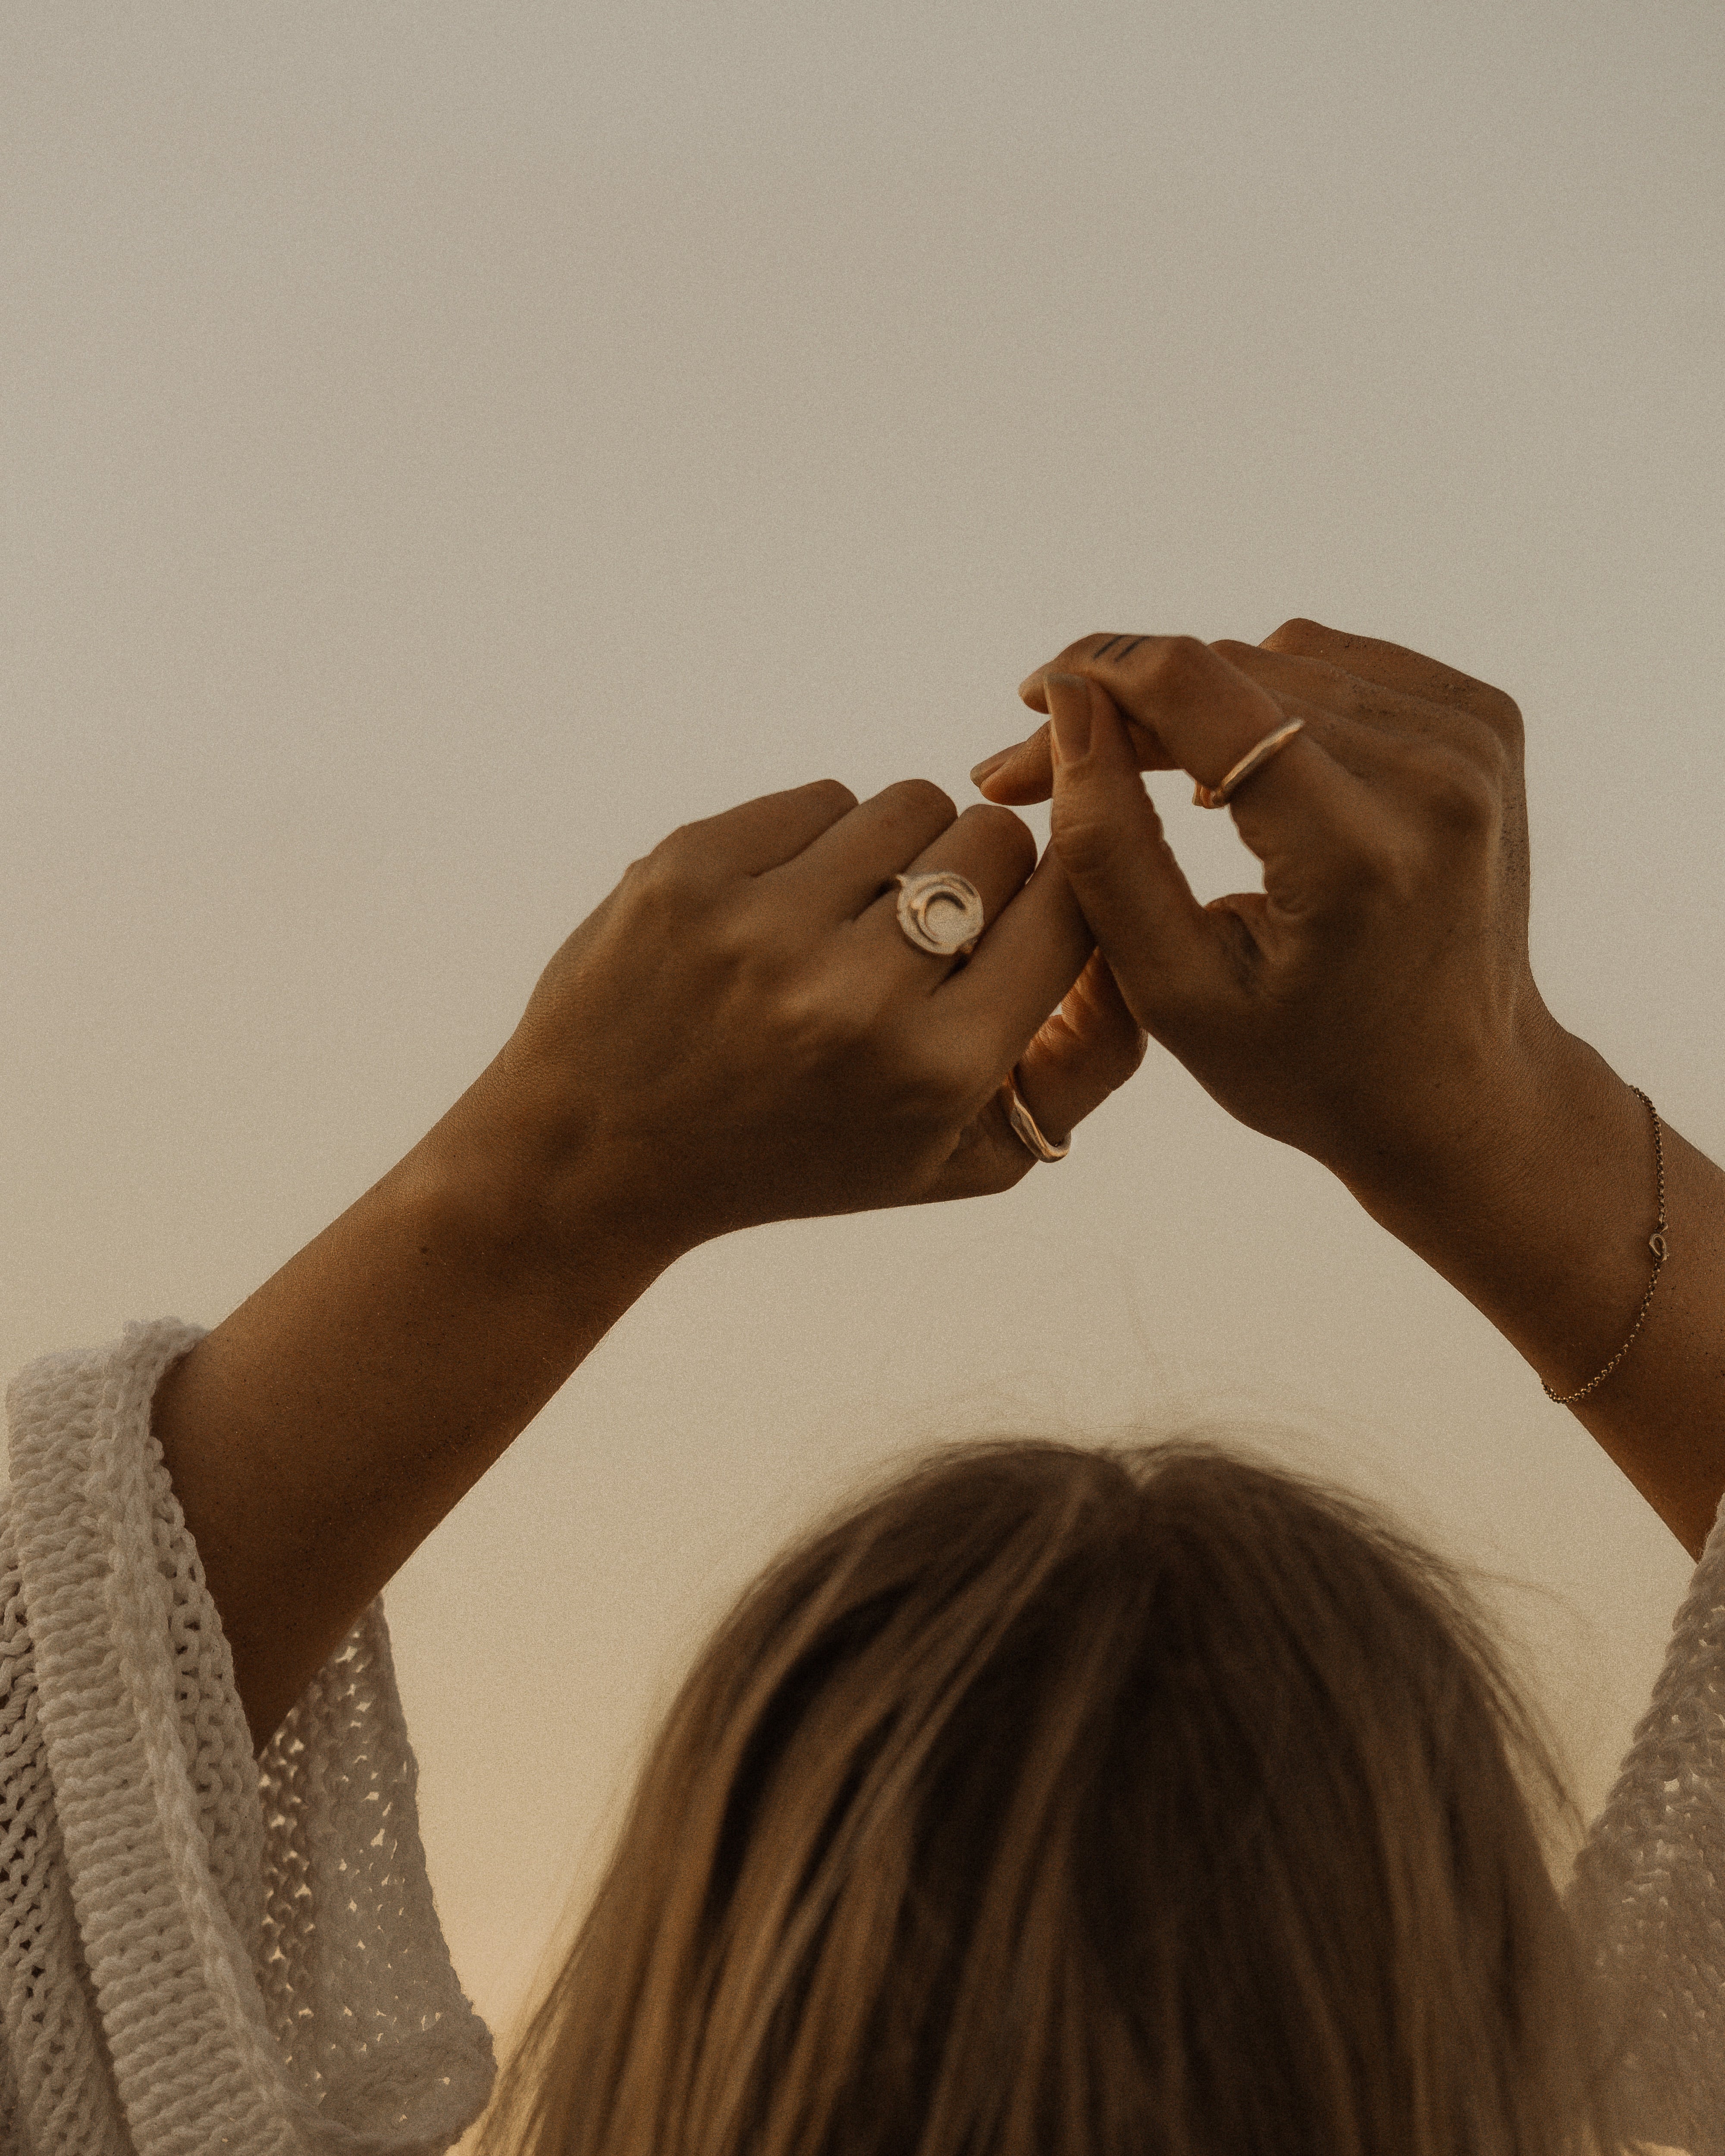 a woman holding her hands above her head against the sky with gold rings and a white knit sweater